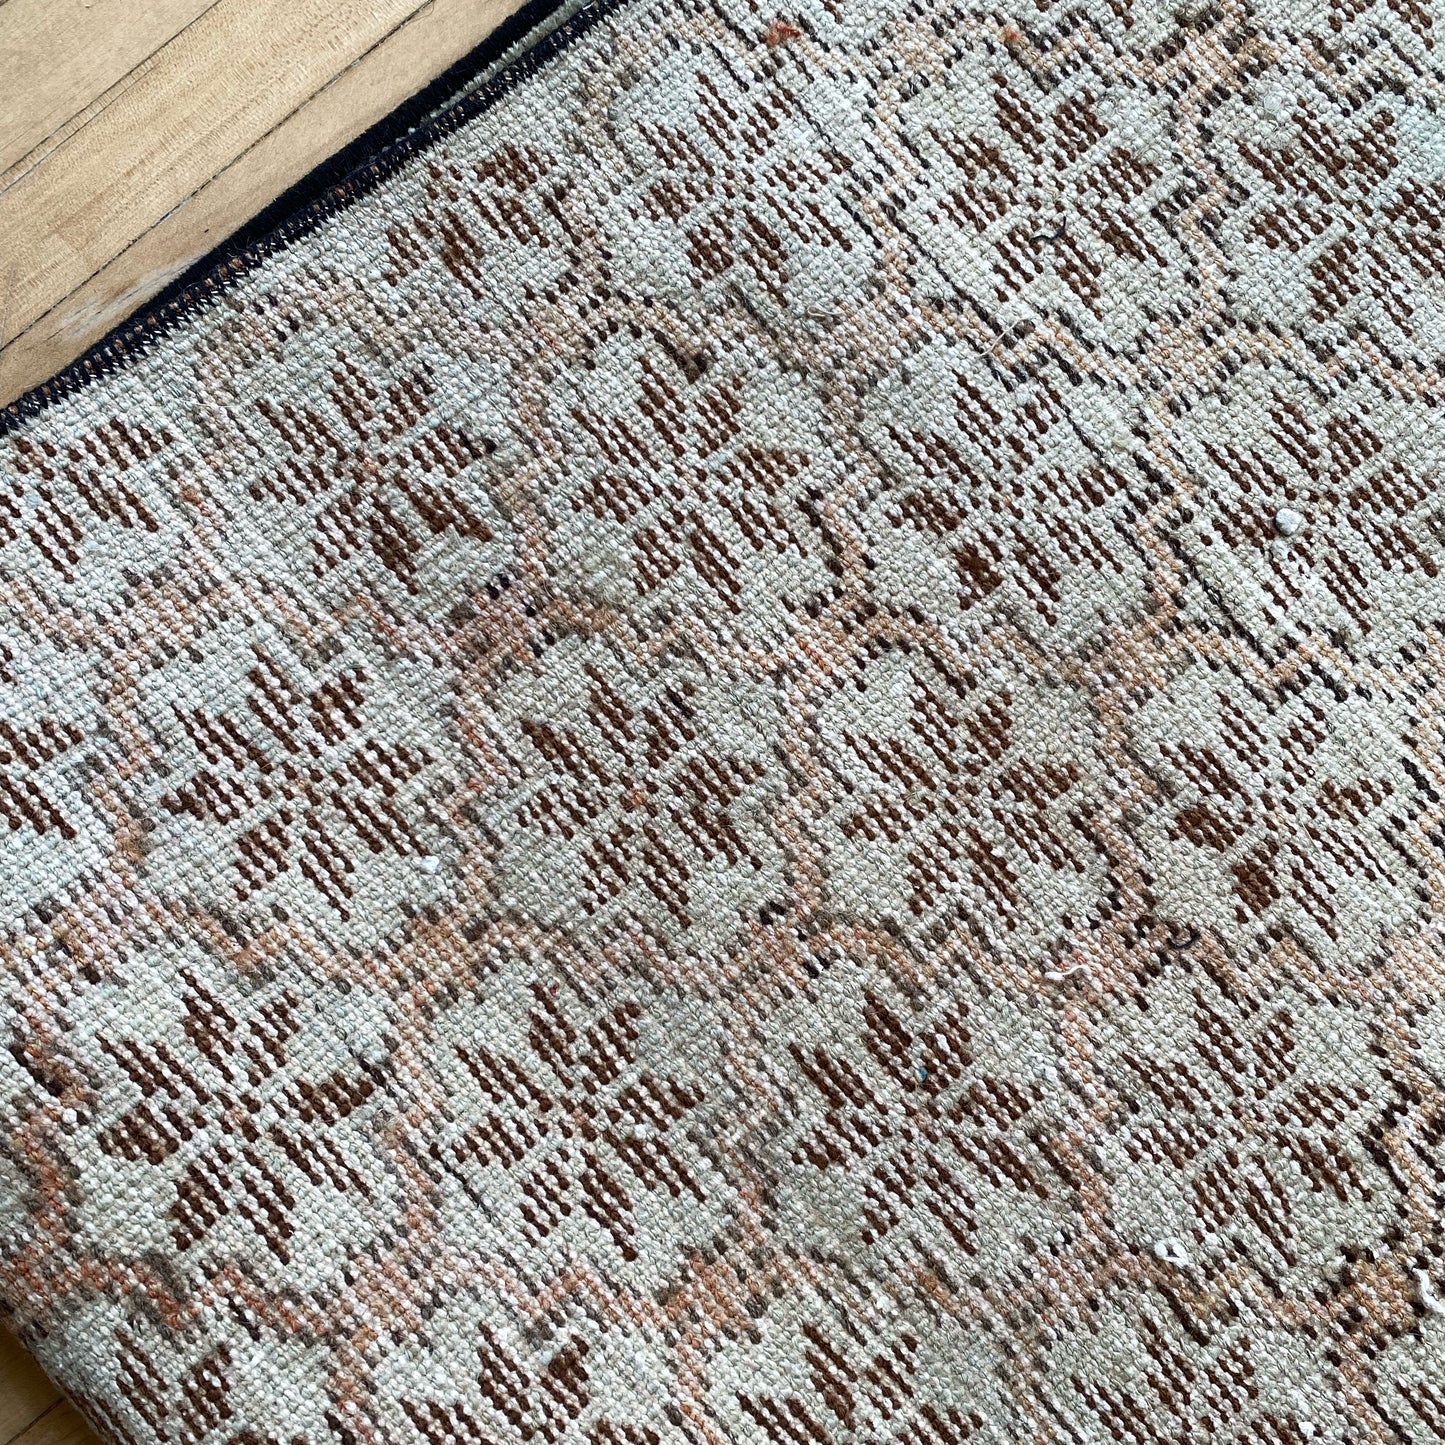 PENNY Vintage Hand-knotted Runner Rug (4’5” x 10’2”)